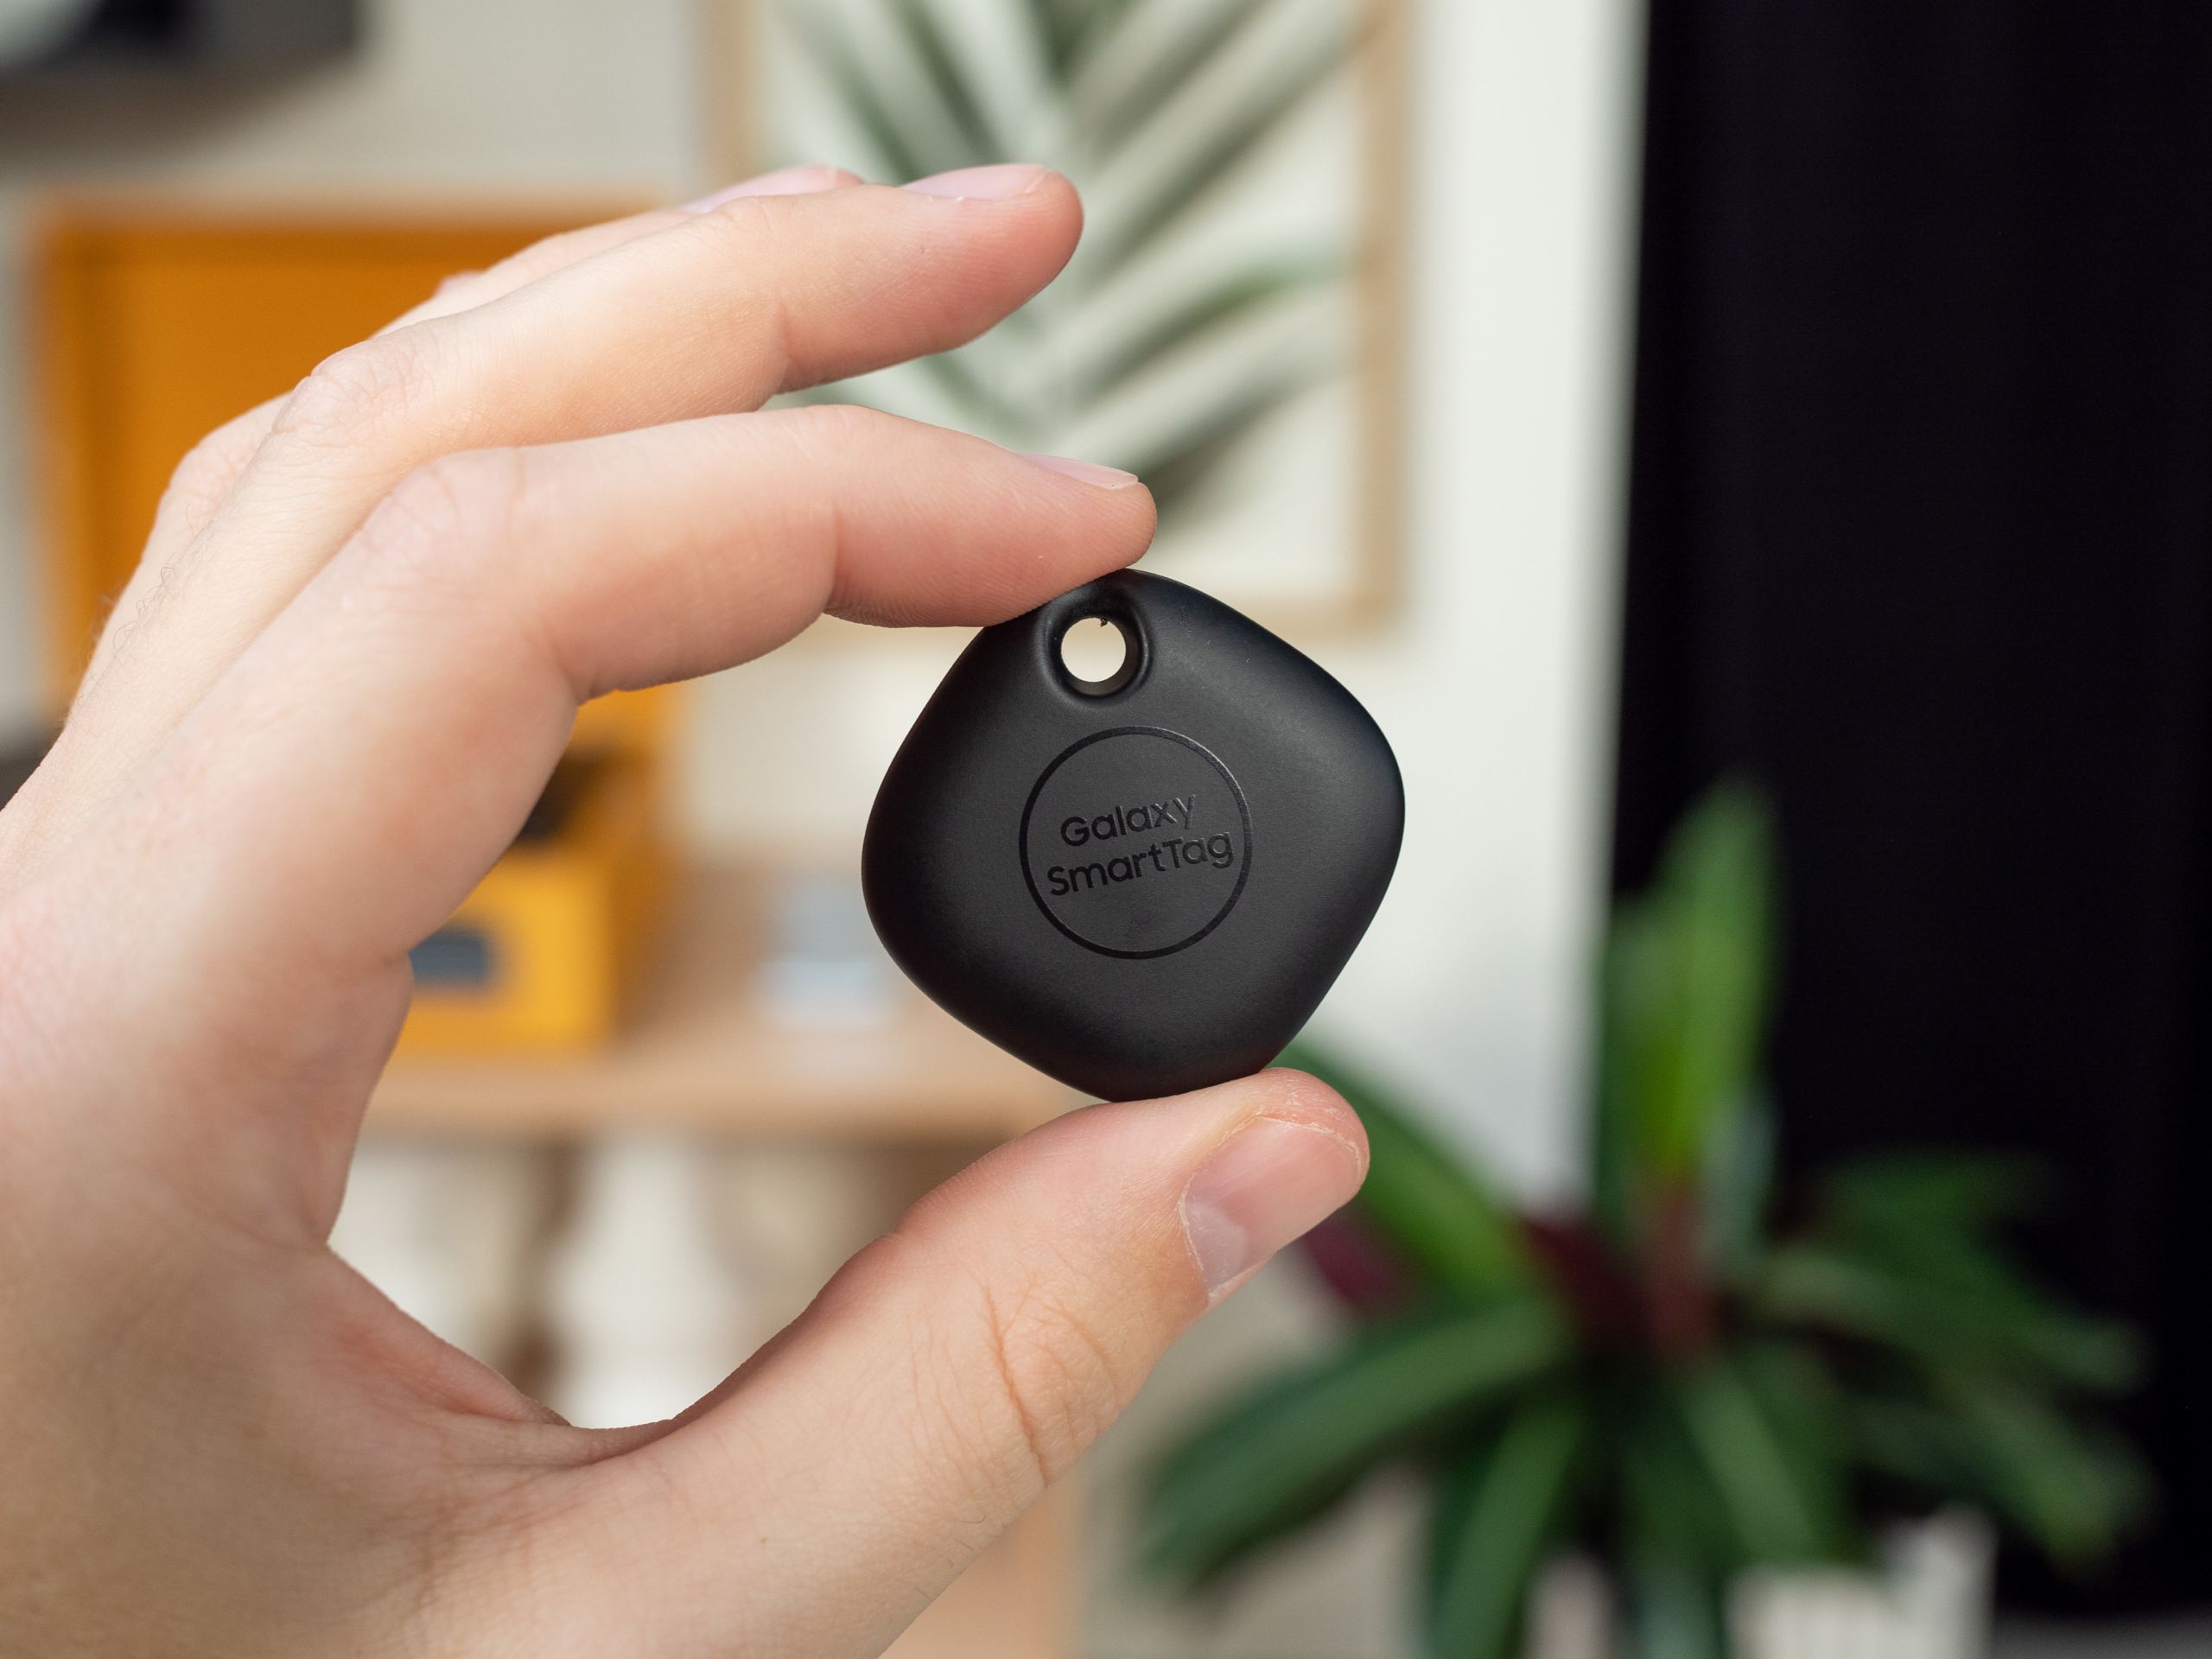 Update Samsung Smart Tag Price Review